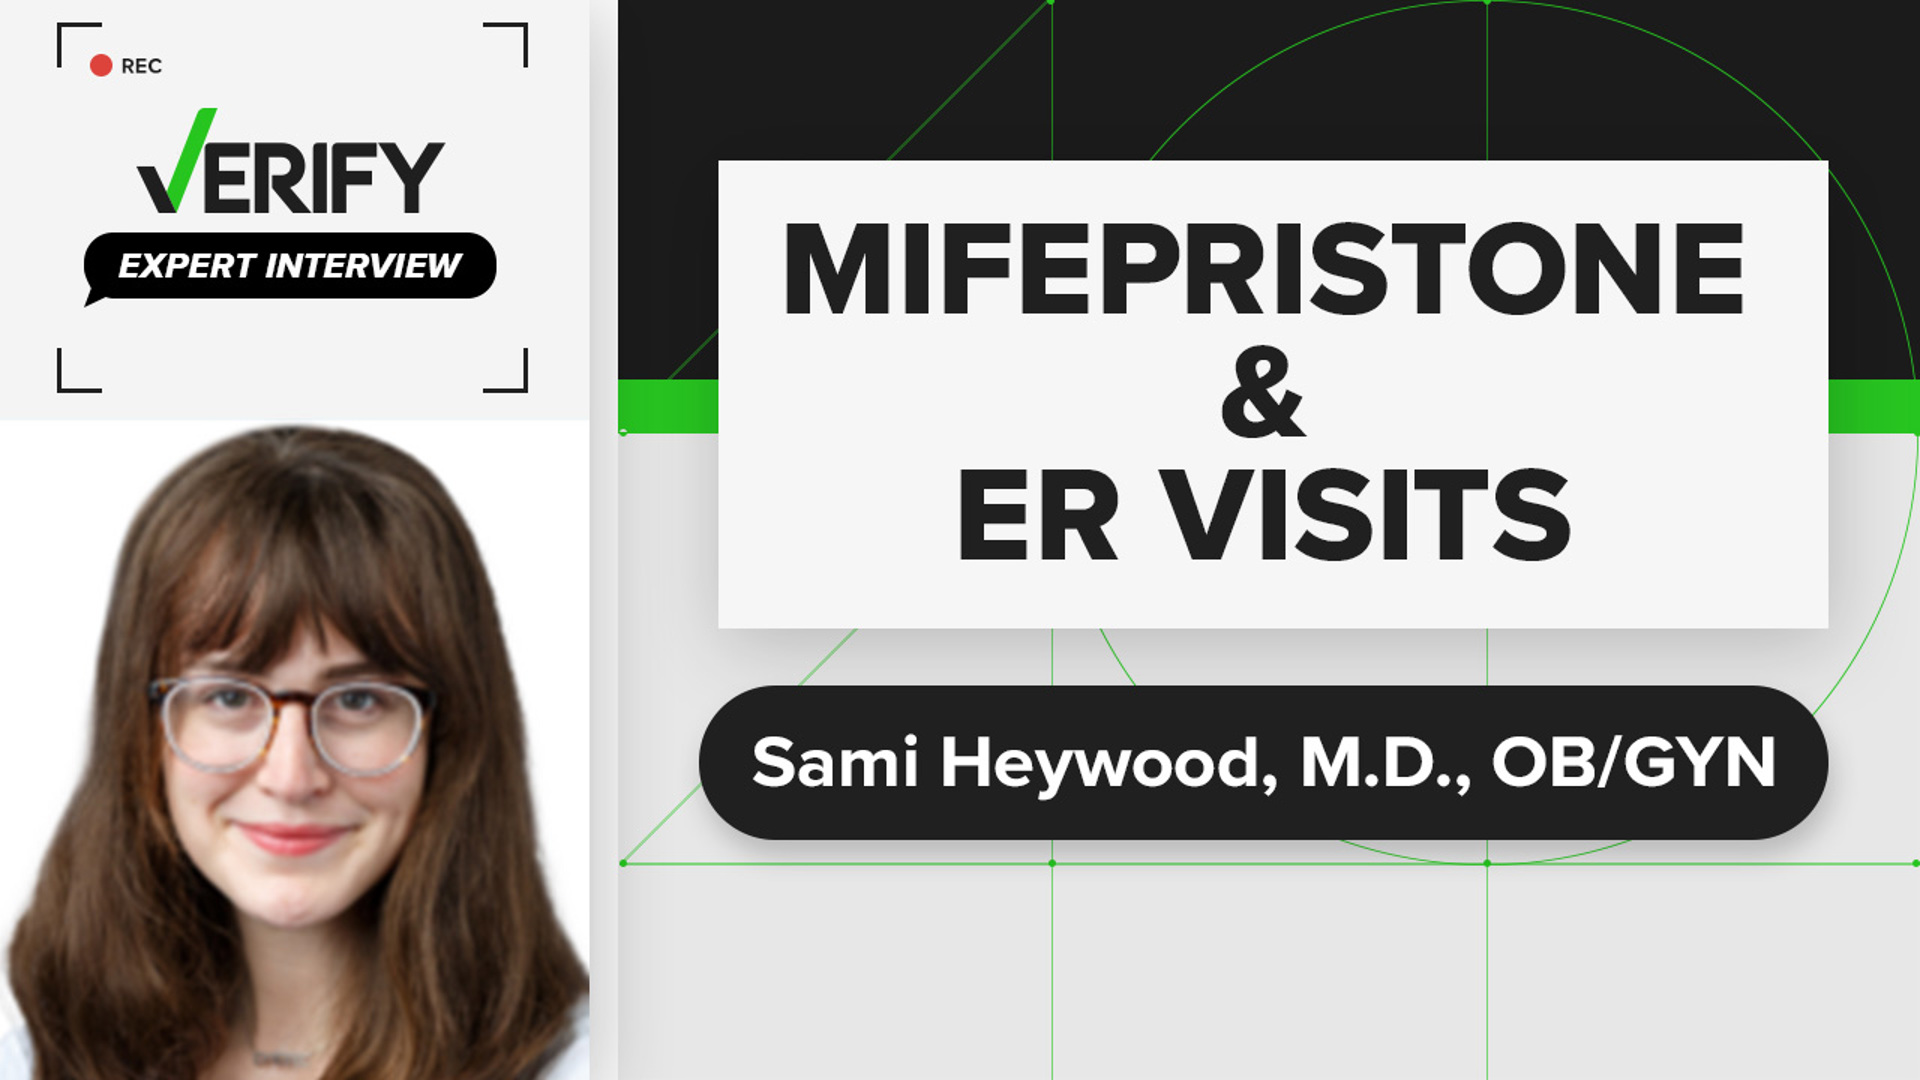 In this episode, Dr. Sami Heywood explains the correlation between Mifepristone and a claim that some people might end up in the ER if they take it.